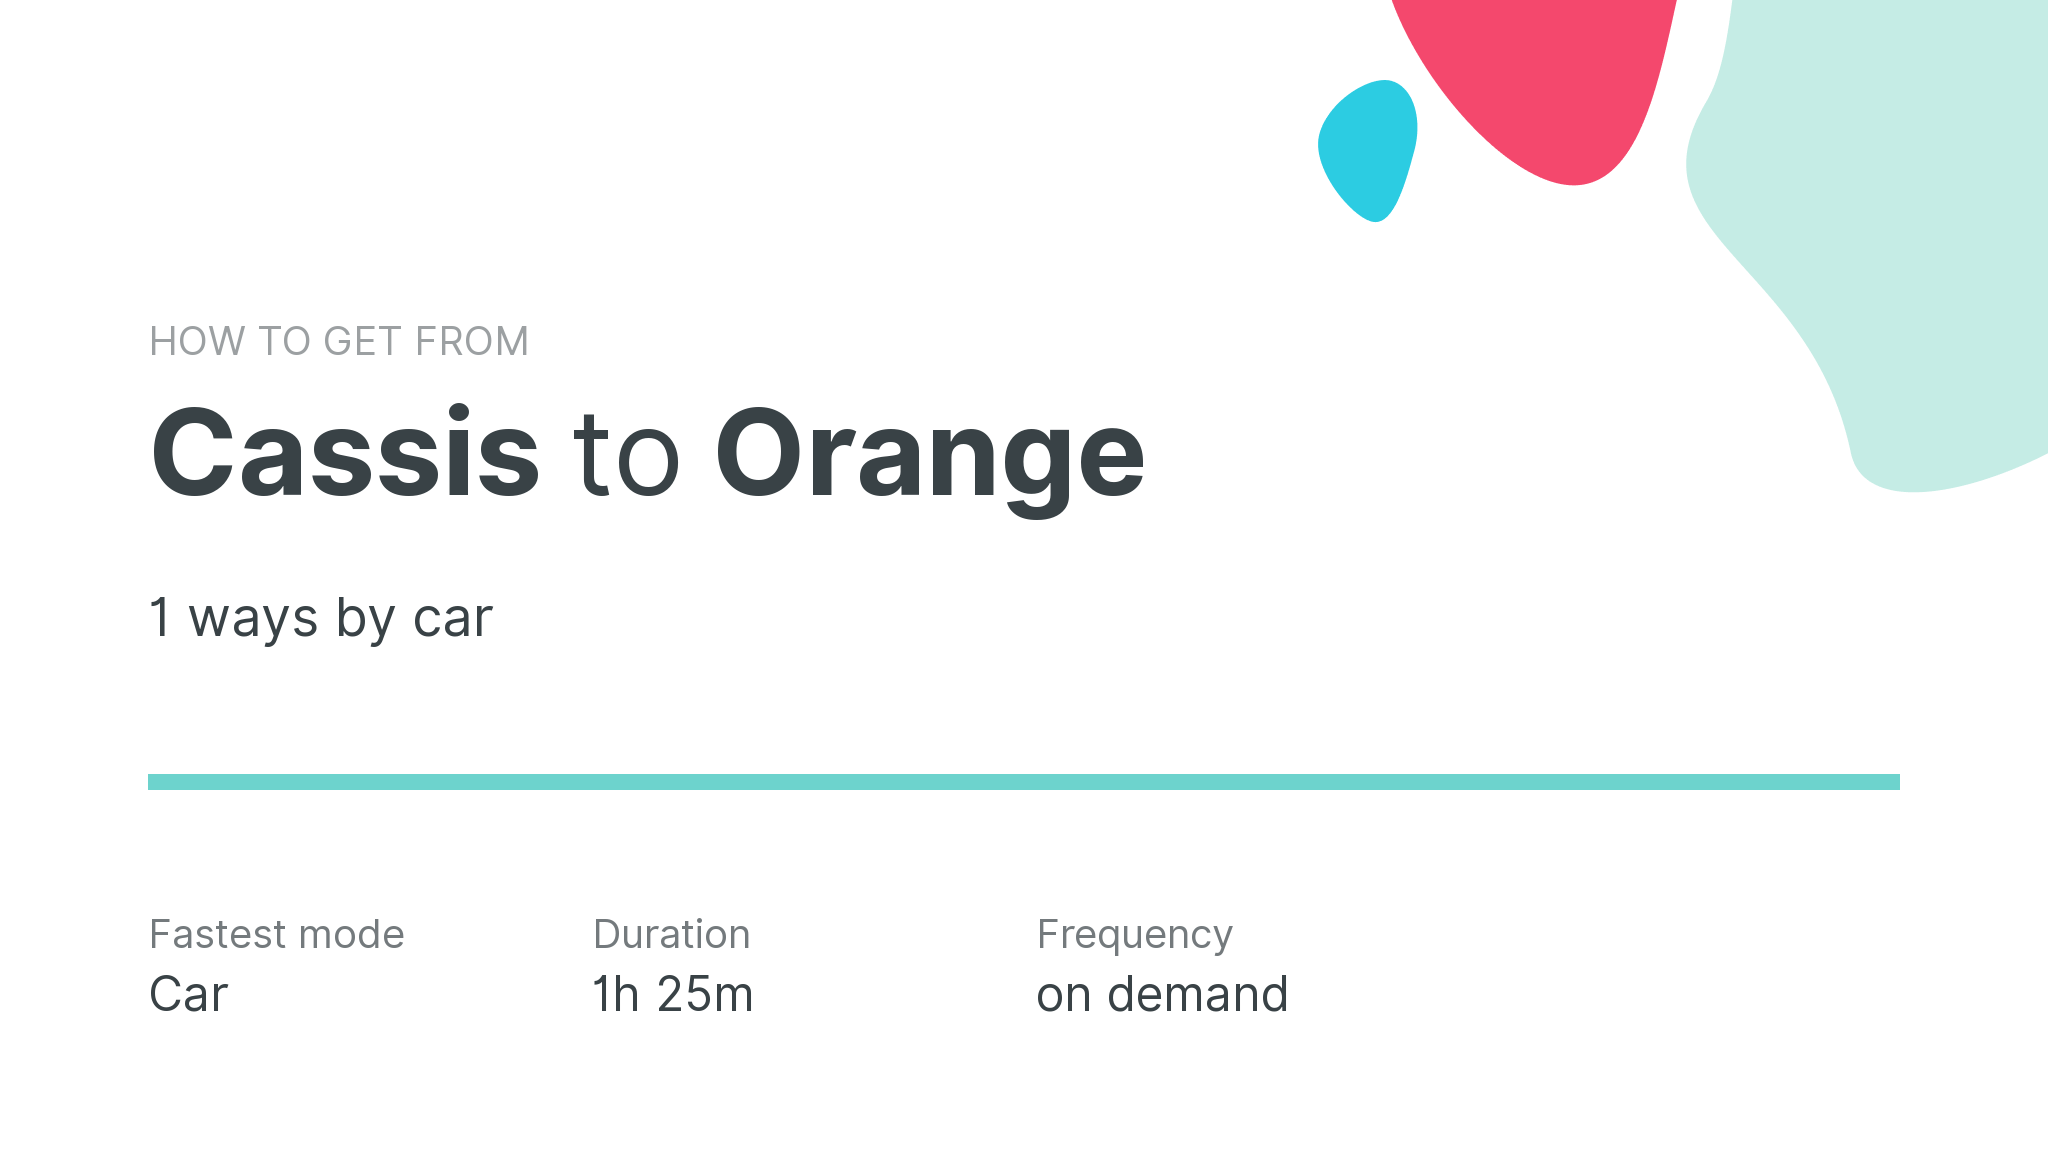 How do I get from Cassis to Orange